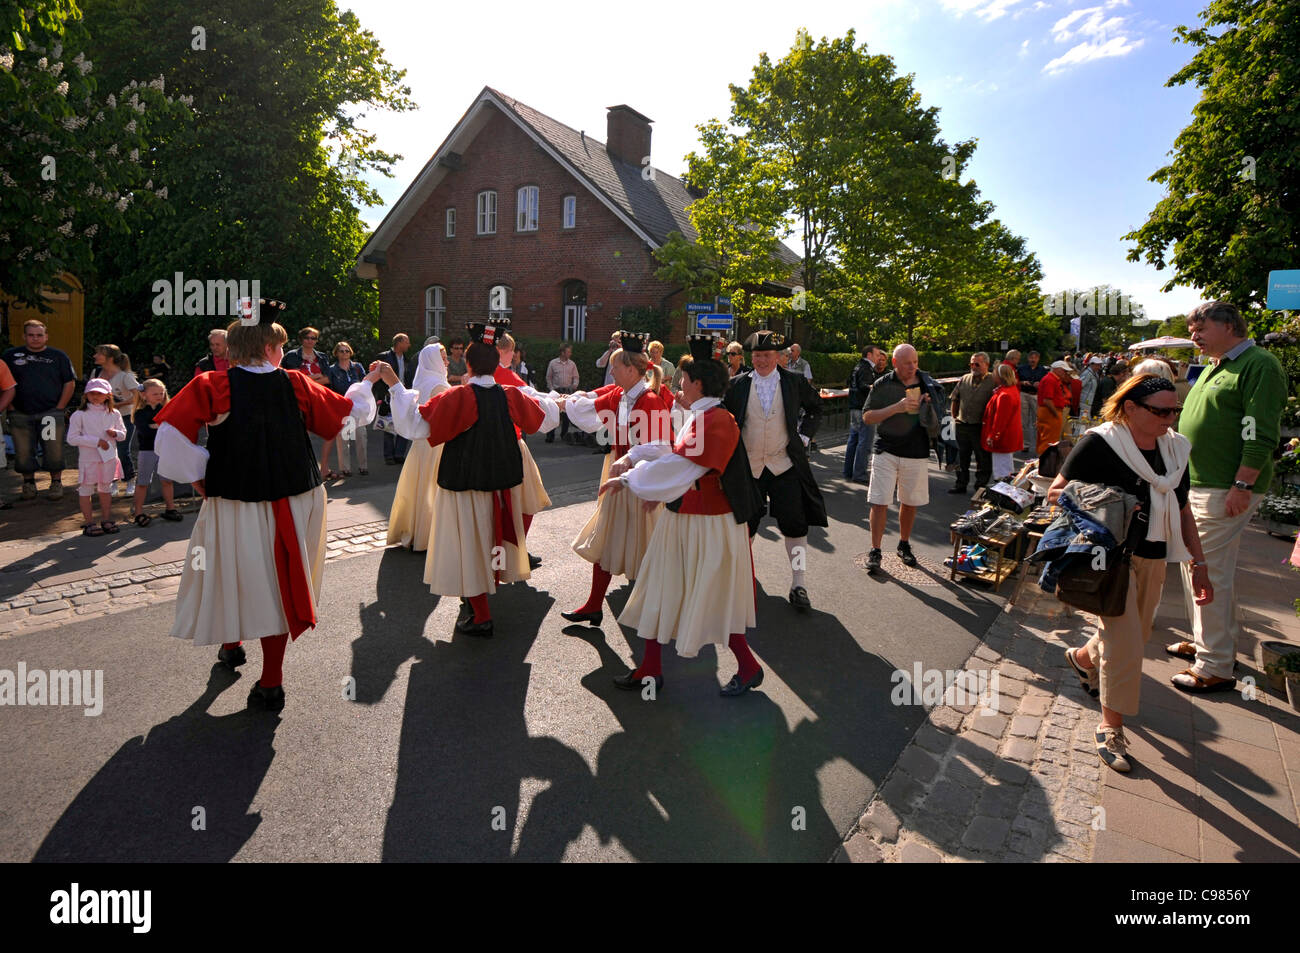 Dancers in traditional costumes, Gurttig Festival, Keitum, Sylt, Schleswig-Holstein, Germany Stock Photo